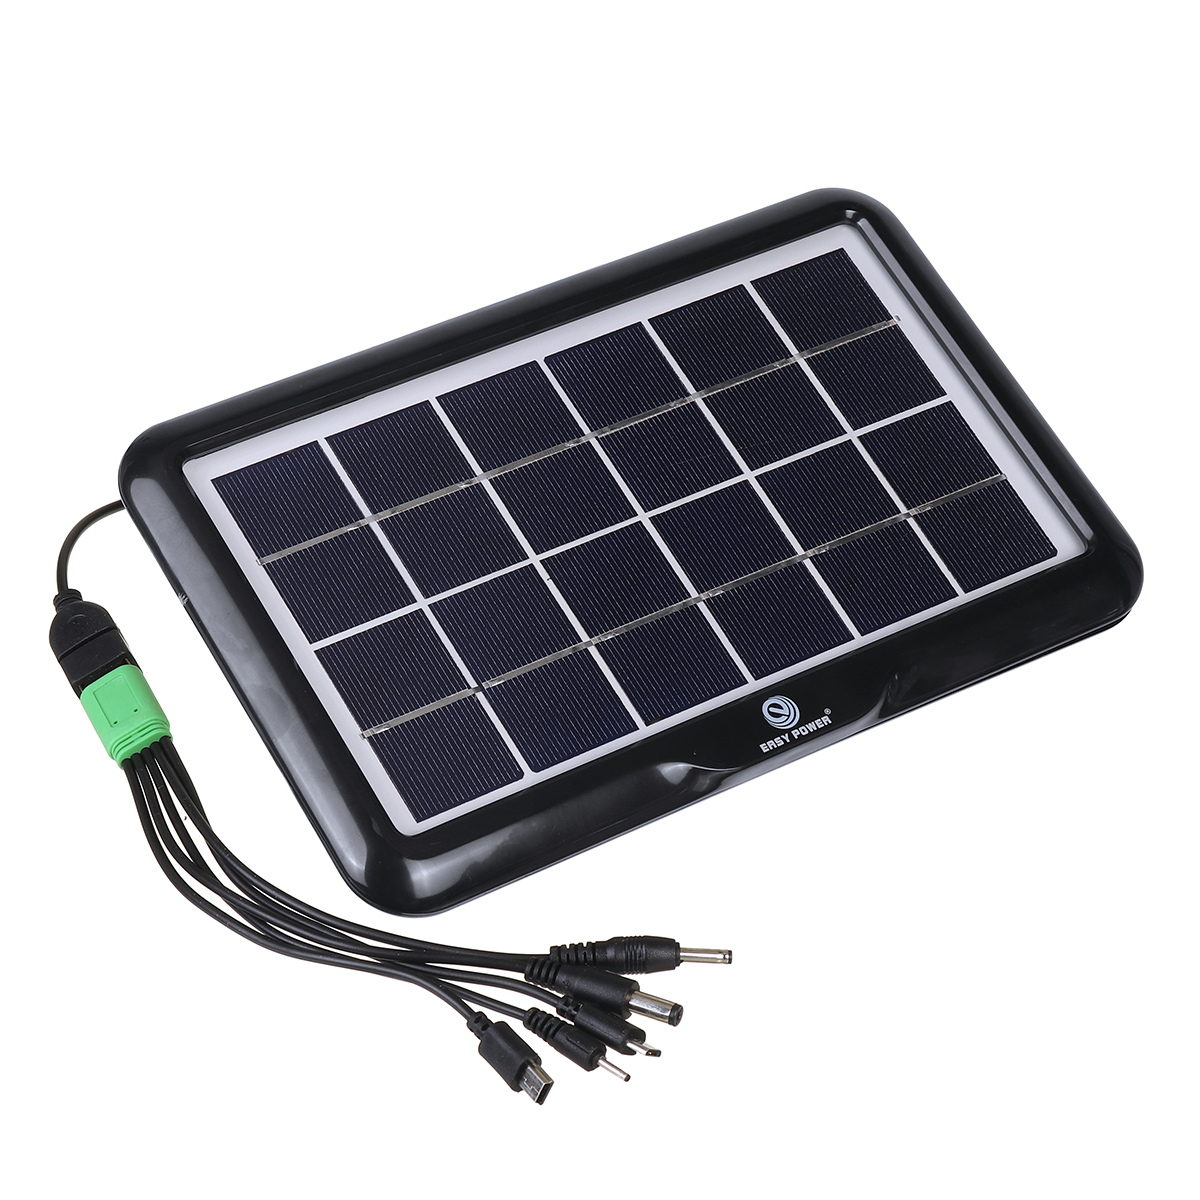 32W-Portable-Outdoor-Solar-Panel-Polycrystalline-Silicon-Solar-Panel-With-Interface-Mobile-Phone-Fan-1928784-8